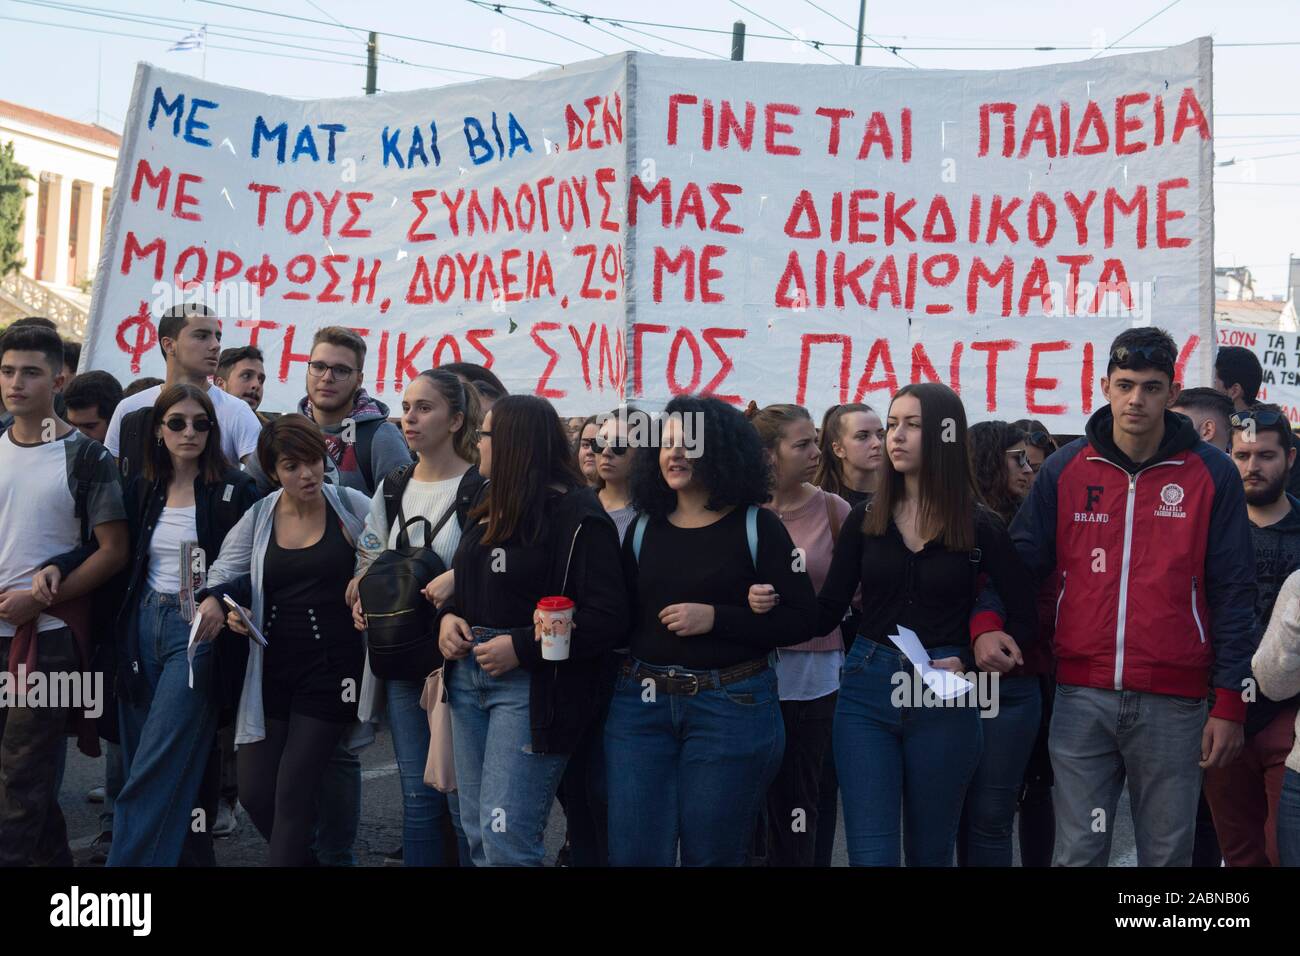 Athens, Greece. 28th Nov 2019. Students rally holding banners and shout slogans against the government and the minister of education. Thousands university students took to the streets to demonstrate against reforms in education, police repression as well as the abolition of the universities’ asylum law. © Nikolas Georgiou / Alamy Live News Credit: Nikolas Georgiou/Alamy Live News Stock Photo